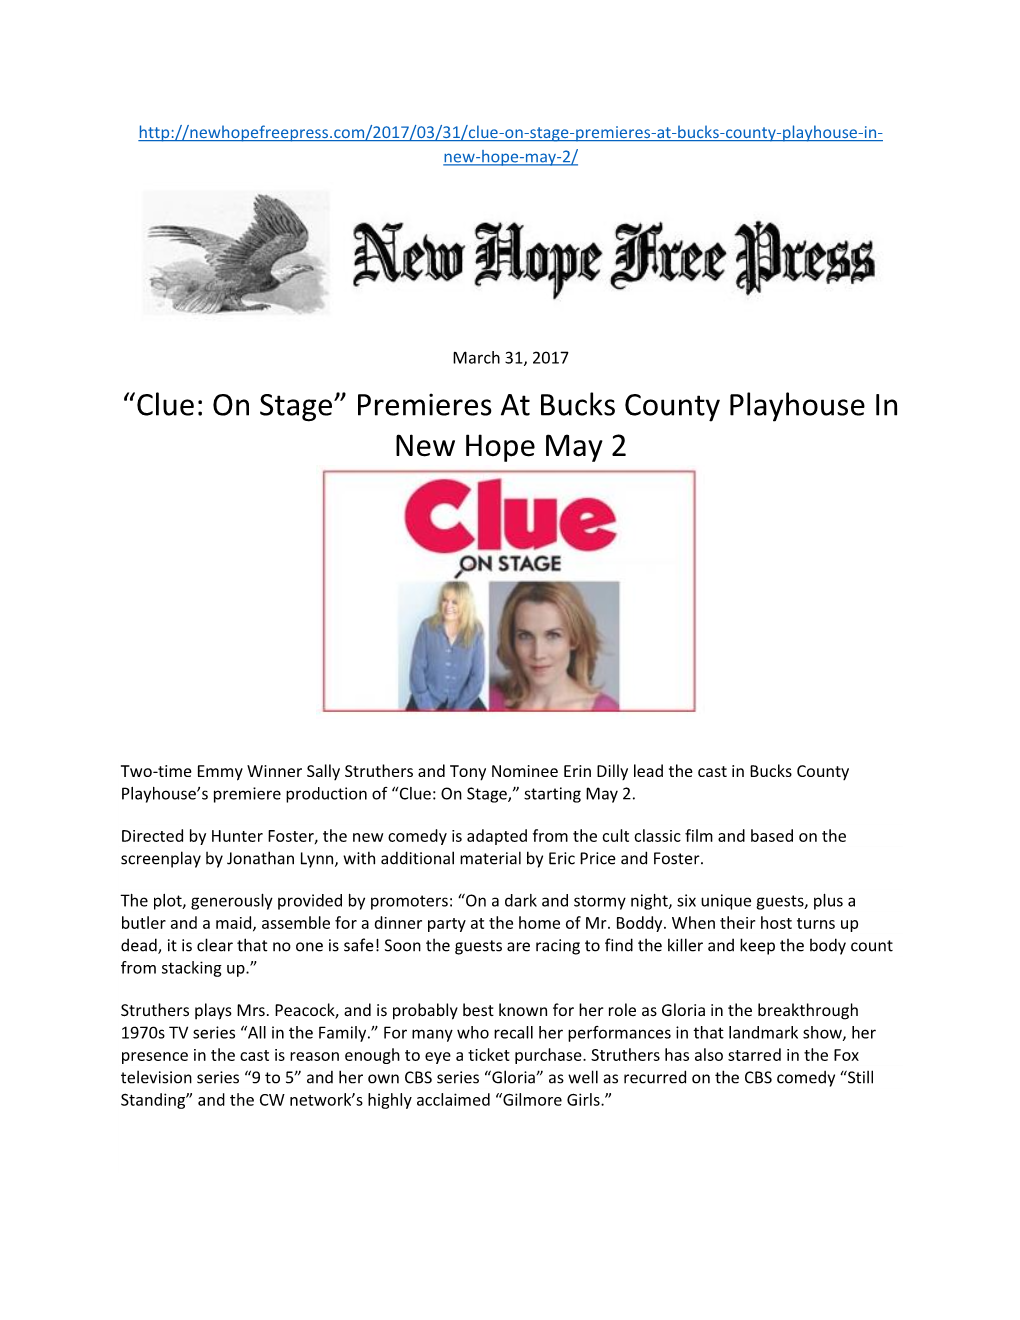 “Clue: on Stage” Premieres at Bucks County Playhouse in New Hope May 2